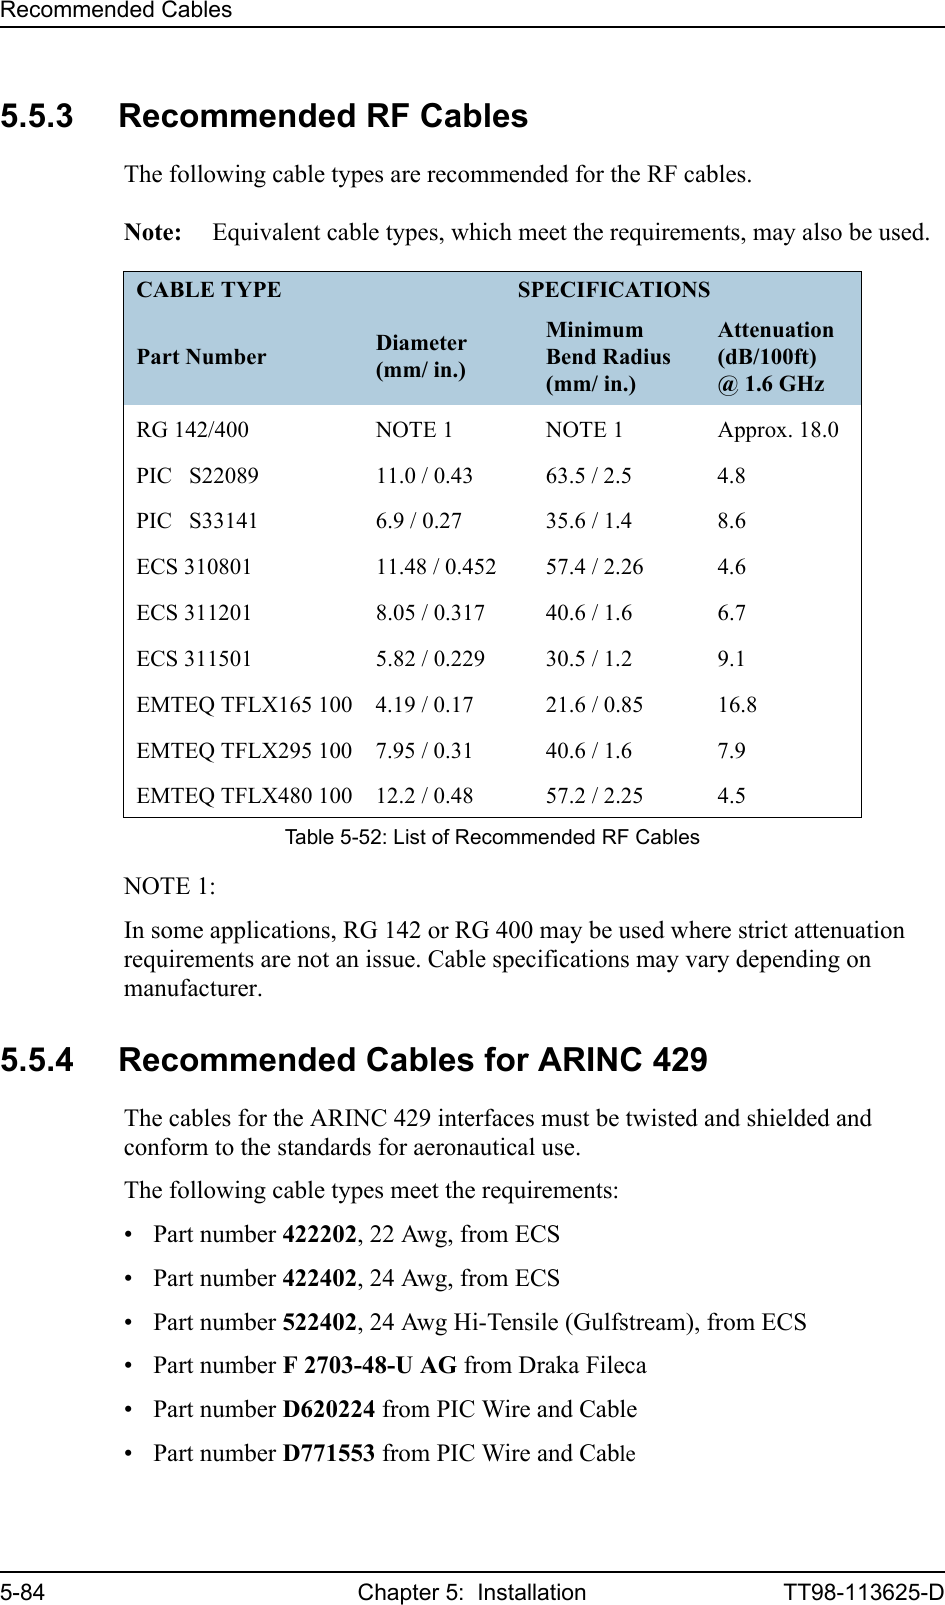 Recommended Cables5-84 Chapter 5:  Installation TT98-113625-D5.5.3 Recommended RF CablesThe following cable types are recommended for the RF cables.Note: Equivalent cable types, which meet the requirements, may also be used.NOTE 1: In some applications, RG 142 or RG 400 may be used where strict attenuation requirements are not an issue. Cable specifications may vary depending on manufacturer.5.5.4 Recommended Cables for ARINC 429The cables for the ARINC 429 interfaces must be twisted and shielded and conform to the standards for aeronautical use.The following cable types meet the requirements:• Part number 422202, 22 Awg, from ECS• Part number 422402, 24 Awg, from ECS• Part number 522402, 24 Awg Hi-Tensile (Gulfstream), from ECS• Part number F 2703-48-U AG from Draka Fileca• Part number D620224 from PIC Wire and Cable• Part number D771553 from PIC Wire and CableCABLE TYPE SPECIFICATIONSPart Number Diameter (mm/ in.)Minimum Bend Radius (mm/ in.)Attenuation (dB/100ft)@ 1.6 GHzRG 142/400 NOTE 1 NOTE 1 Approx. 18.0PIC   S22089 11.0 / 0.43 63.5 / 2.5 4.8PIC   S33141 6.9 / 0.27 35.6 / 1.4 8.6ECS 310801 11.48 / 0.452 57.4 / 2.26 4.6ECS 311201 8.05 / 0.317 40.6 / 1.6 6.7ECS 311501 5.82 / 0.229 30.5 / 1.2 9.1EMTEQ TFLX165 100 4.19 / 0.17 21.6 / 0.85 16.8EMTEQ TFLX295 100 7.95 / 0.31 40.6 / 1.6 7.9EMTEQ TFLX480 100 12.2 / 0.48 57.2 / 2.25 4.5Table 5-52: List of Recommended RF Cables